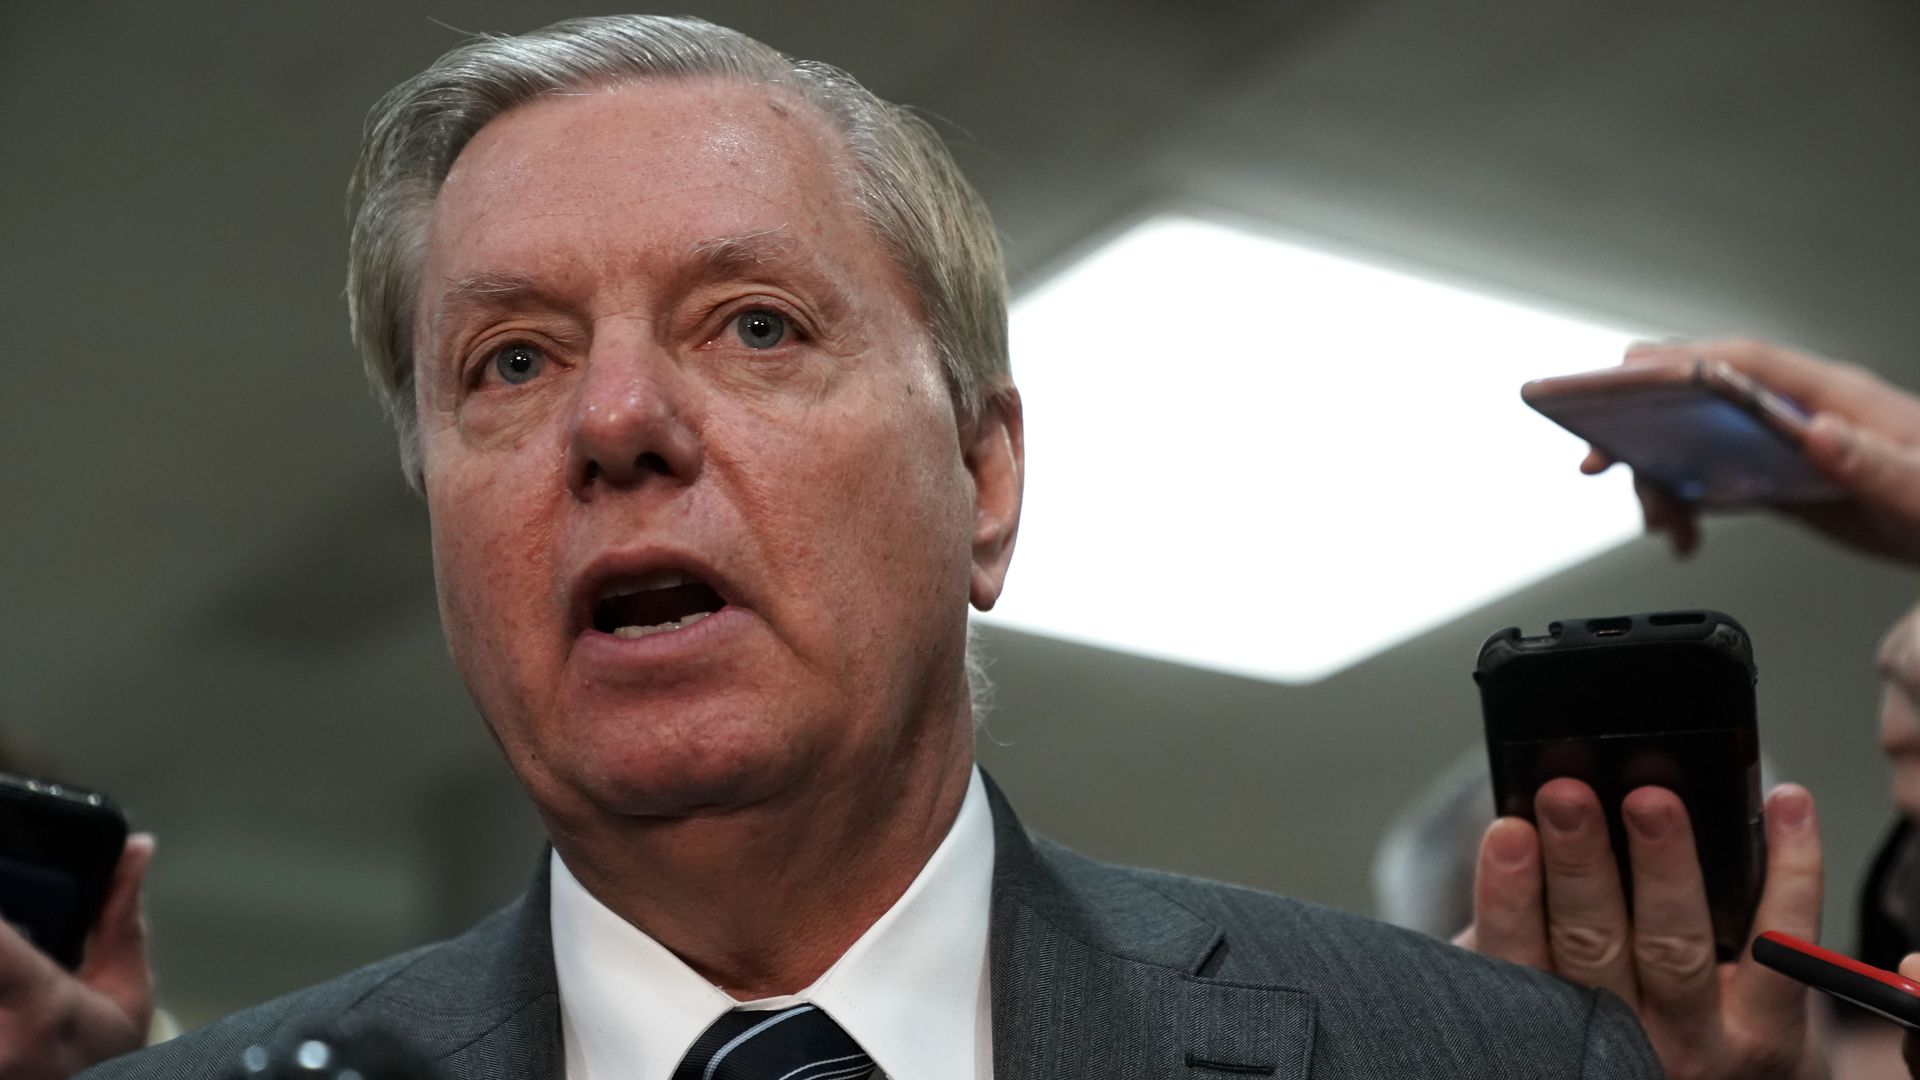 Lindsey Graham has hinted at further questioning of former FBI director James Comey.